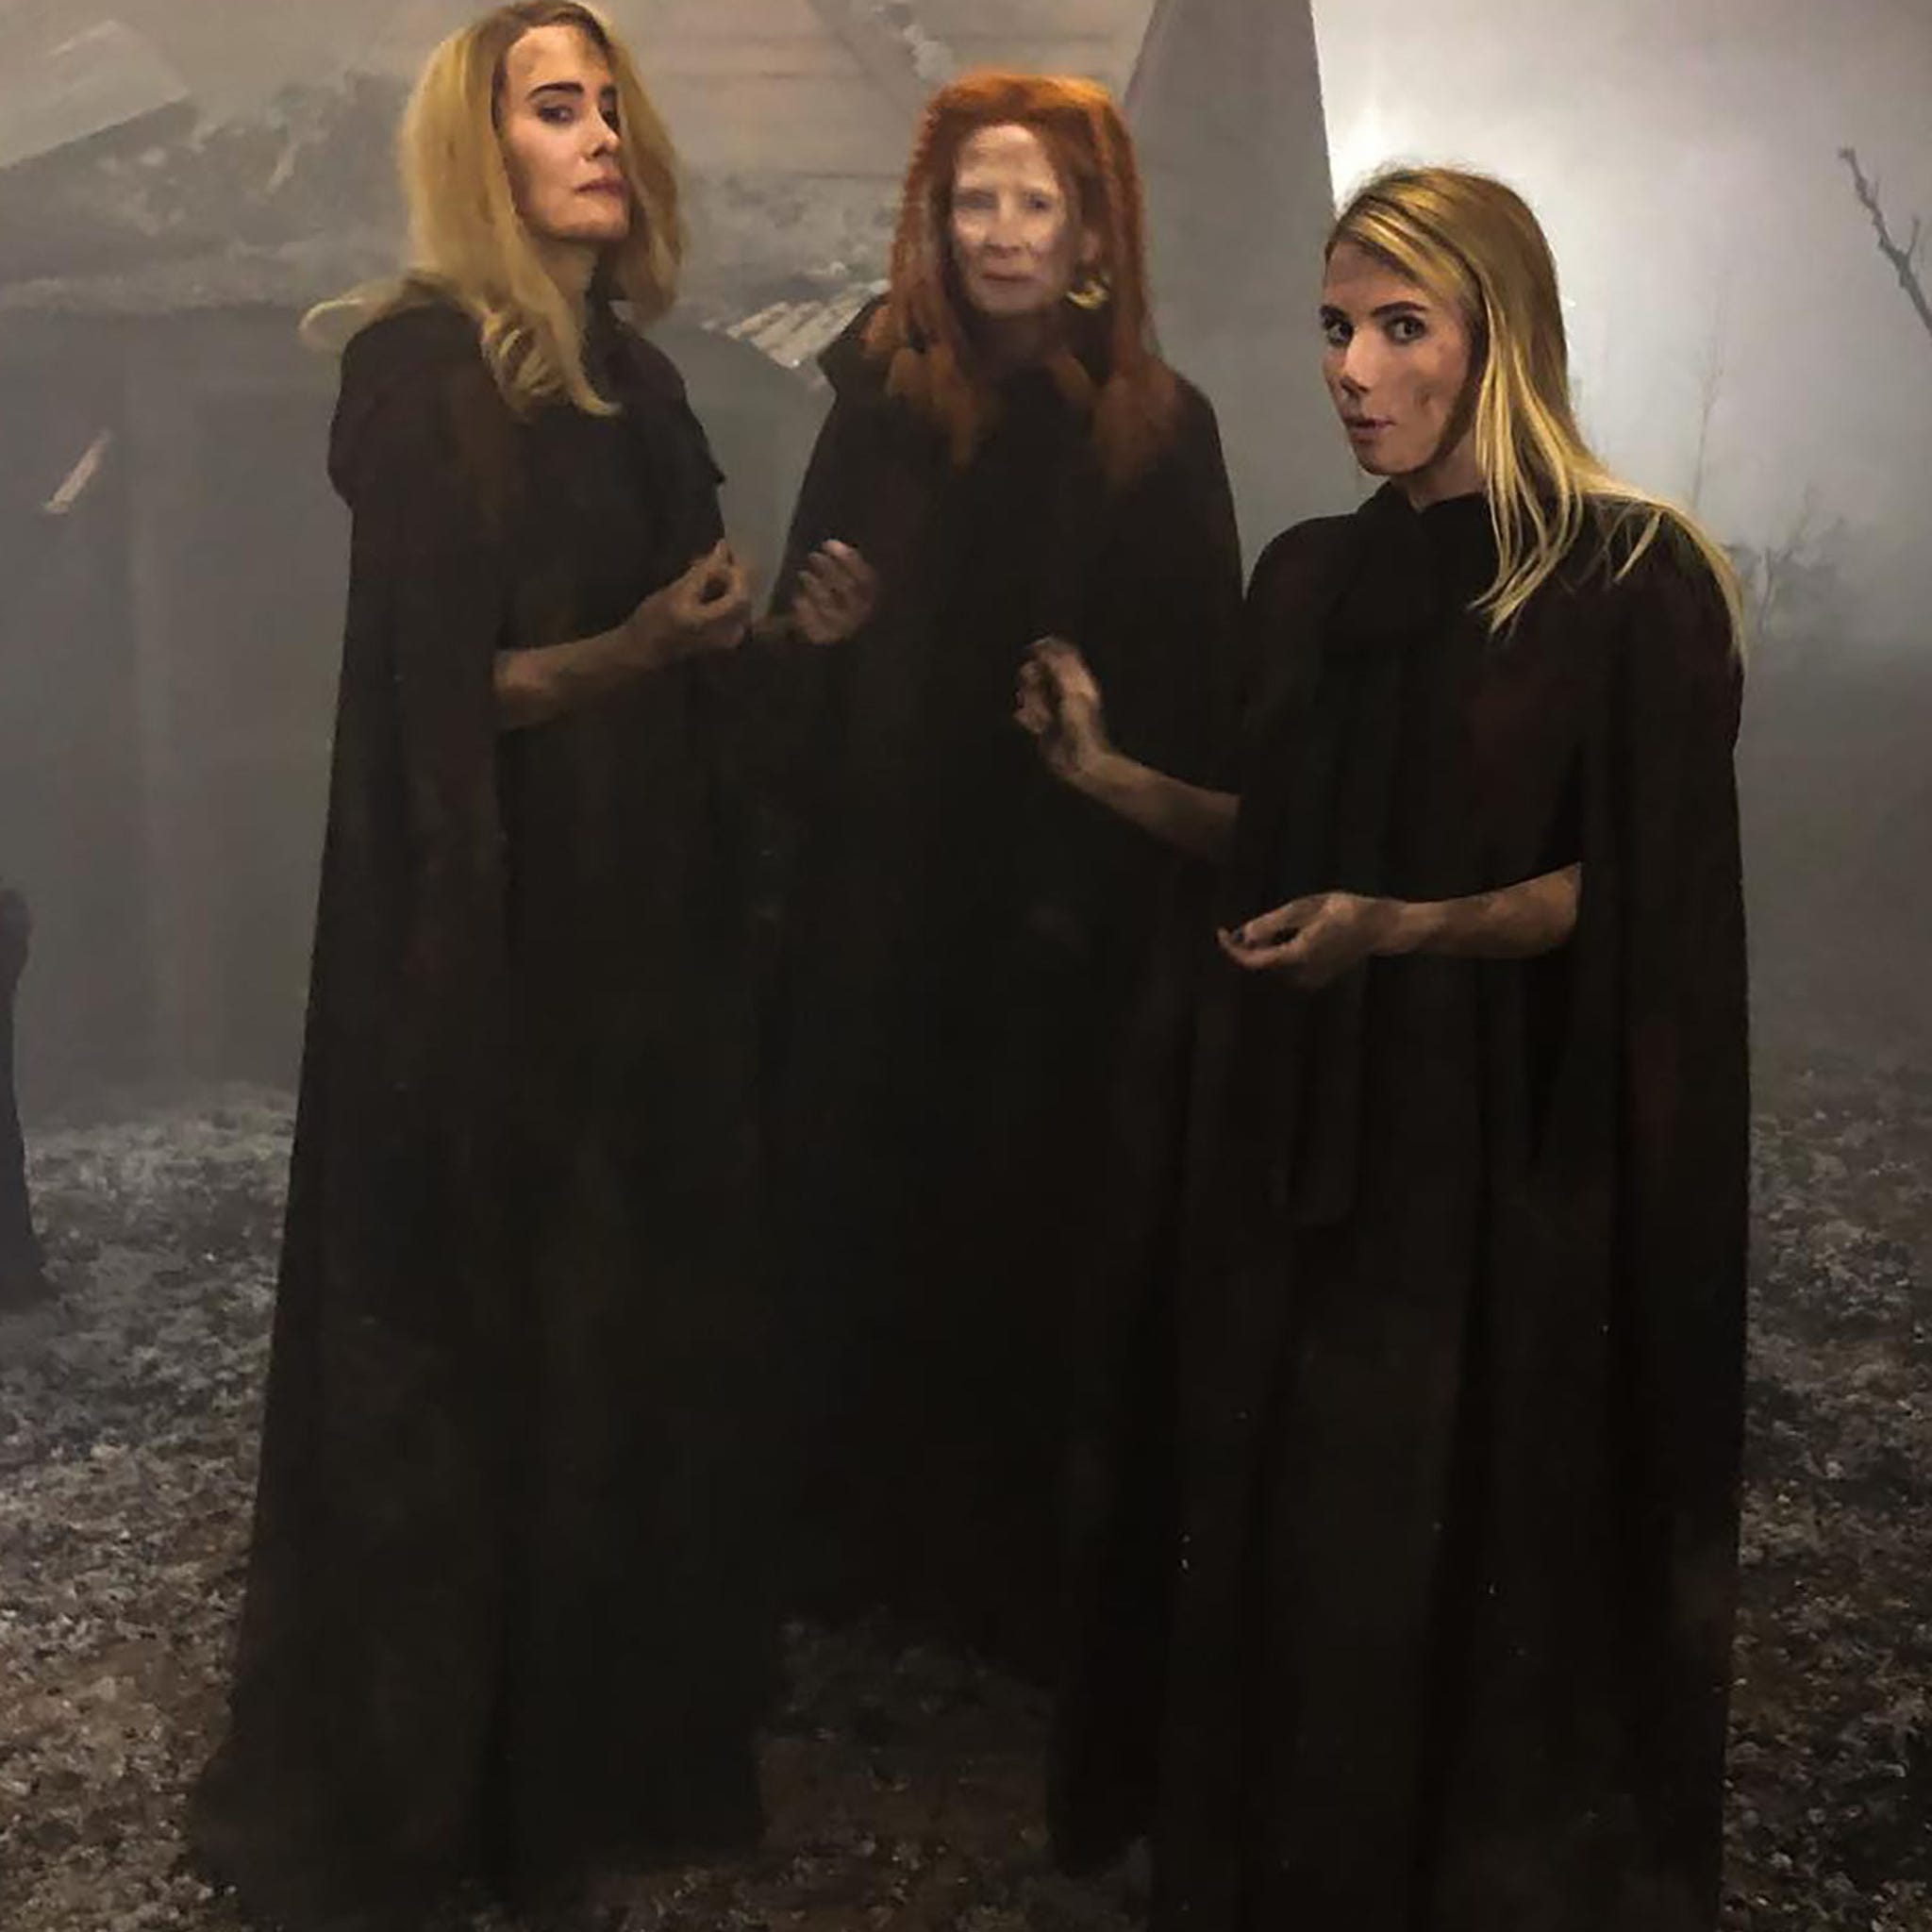 American Horror Story: Apocalypse bringing back Coven witches and Stevie  Nicks